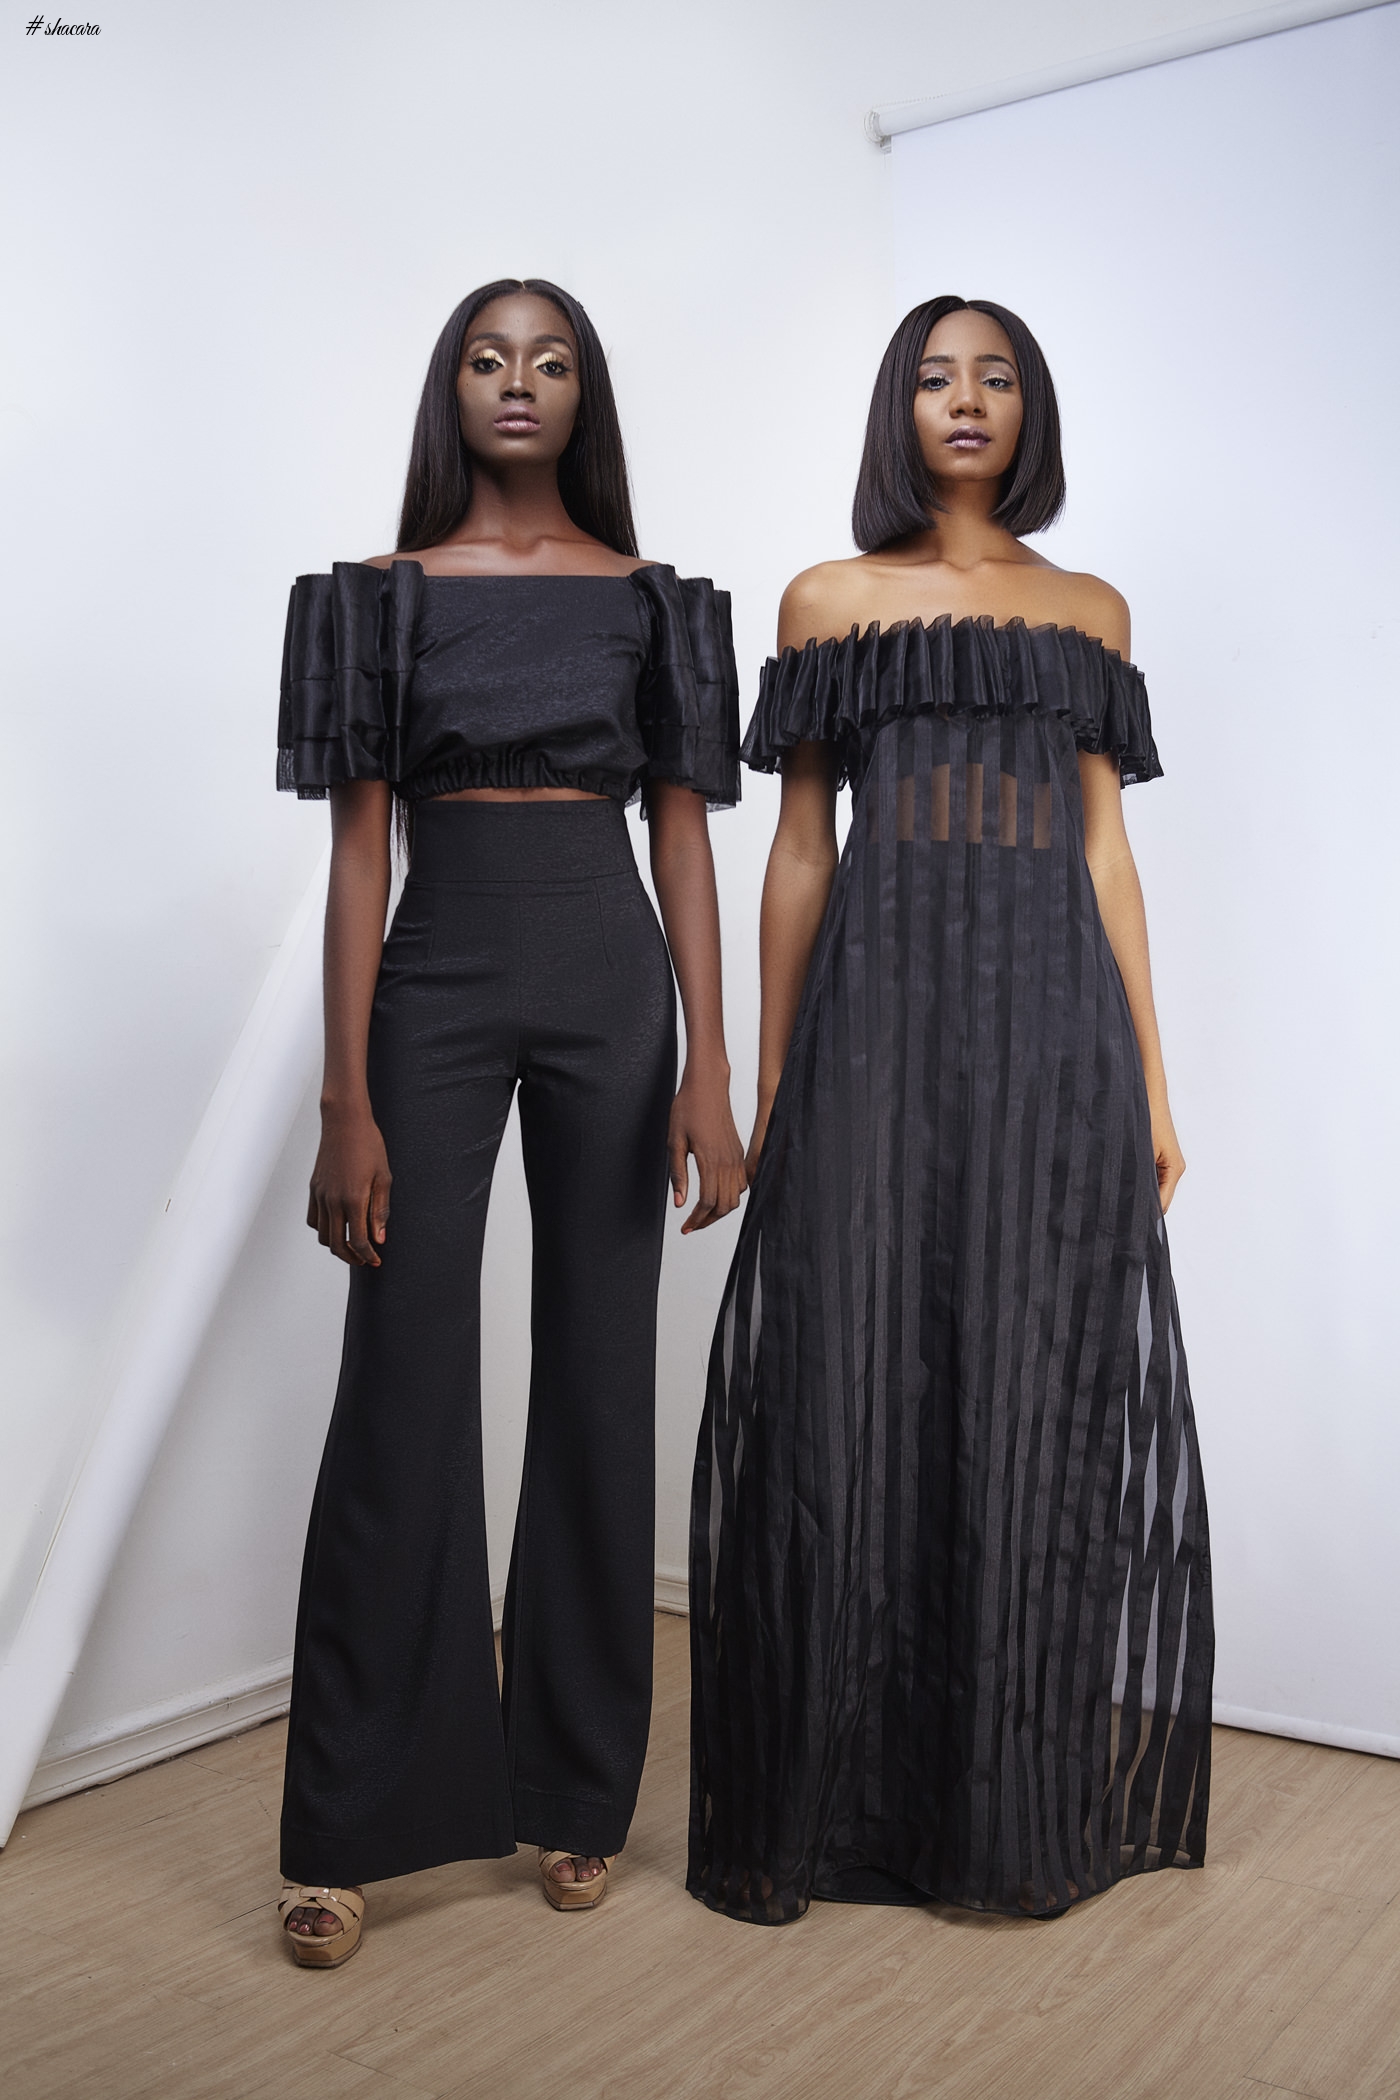 Womenswear Fashion Brand Anne Jacob Returns With Resort 2017 Collection